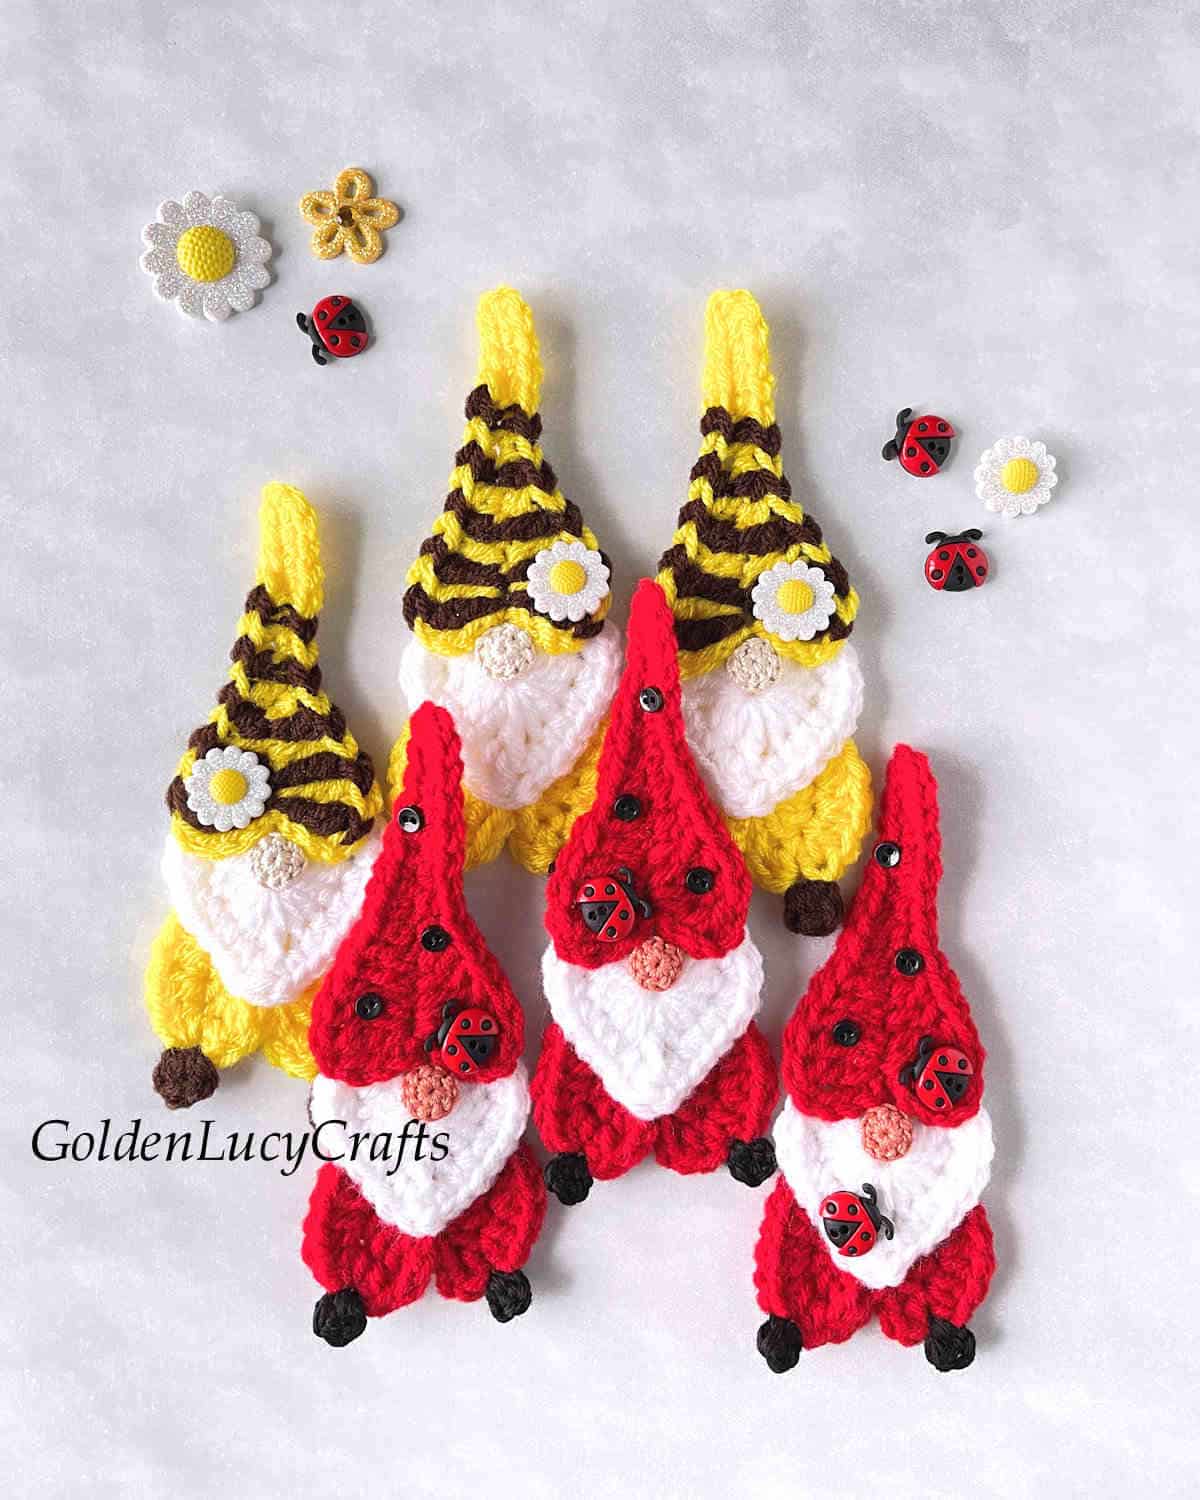 Six crocheted heart gnomes - three red and three yellow.